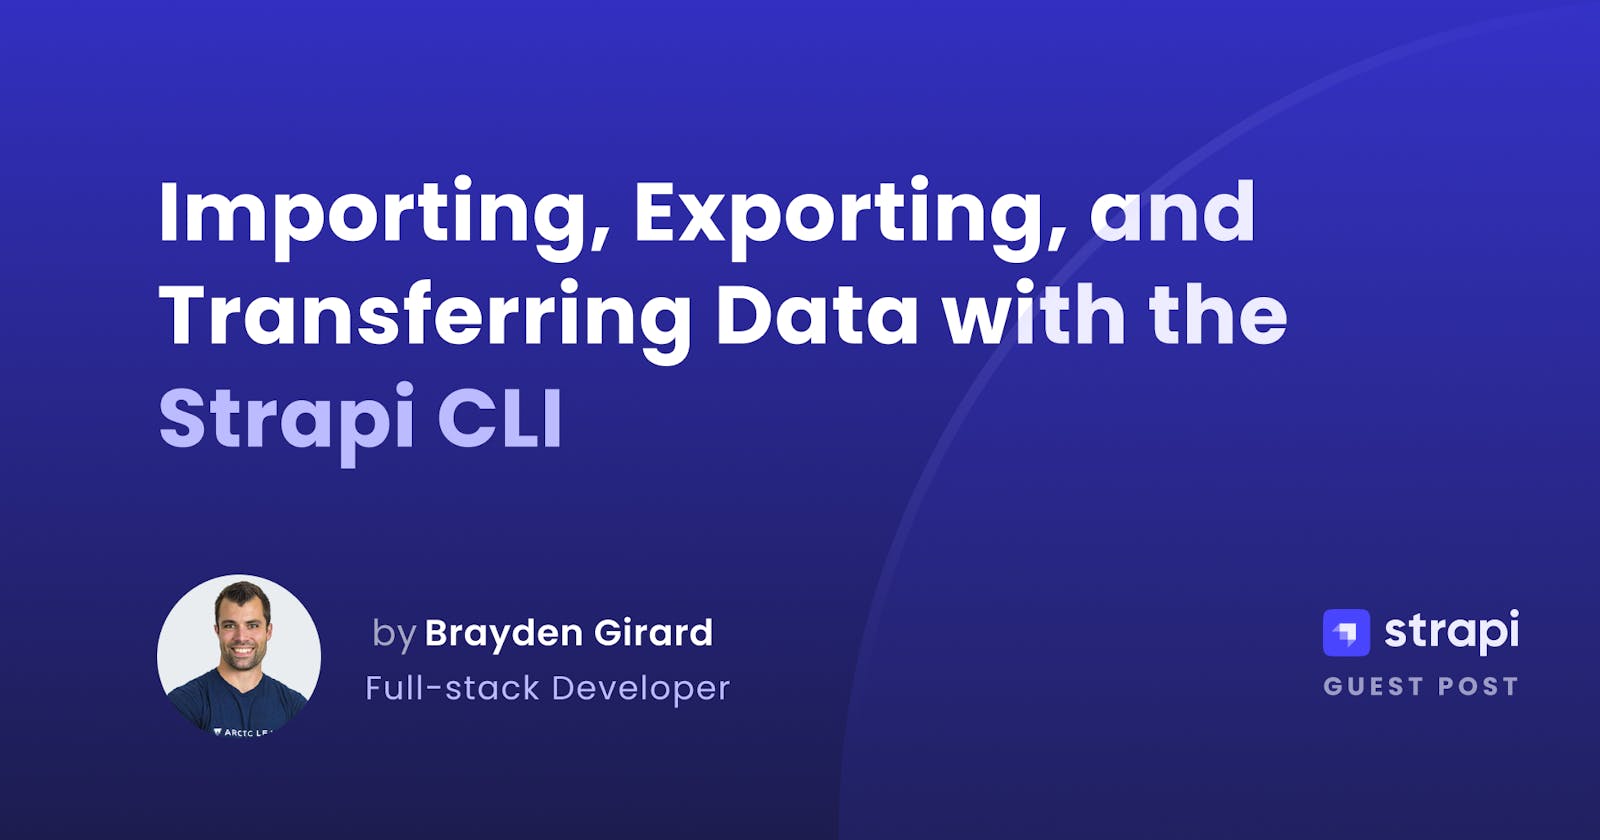 Importing, Exporting, and Transferring Data with the Strapi CLI